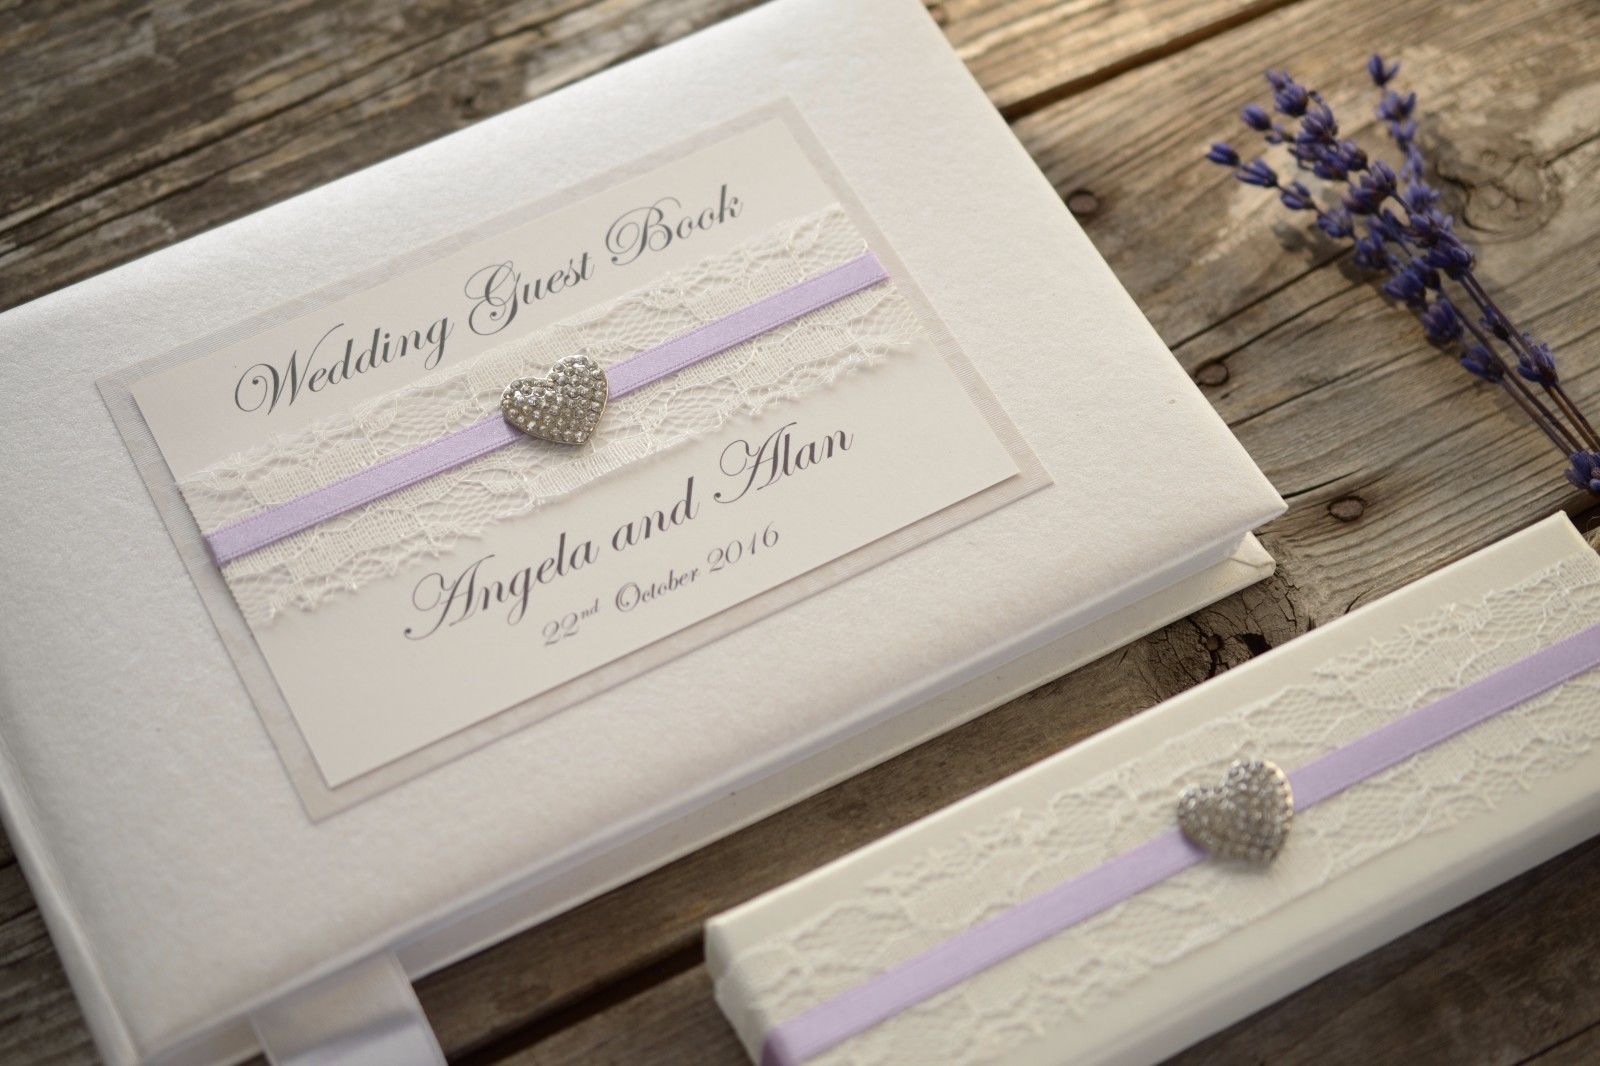 Wedding Guest Book Kl
 Personalised Wedding Guest Book and Pen Set – Lace and